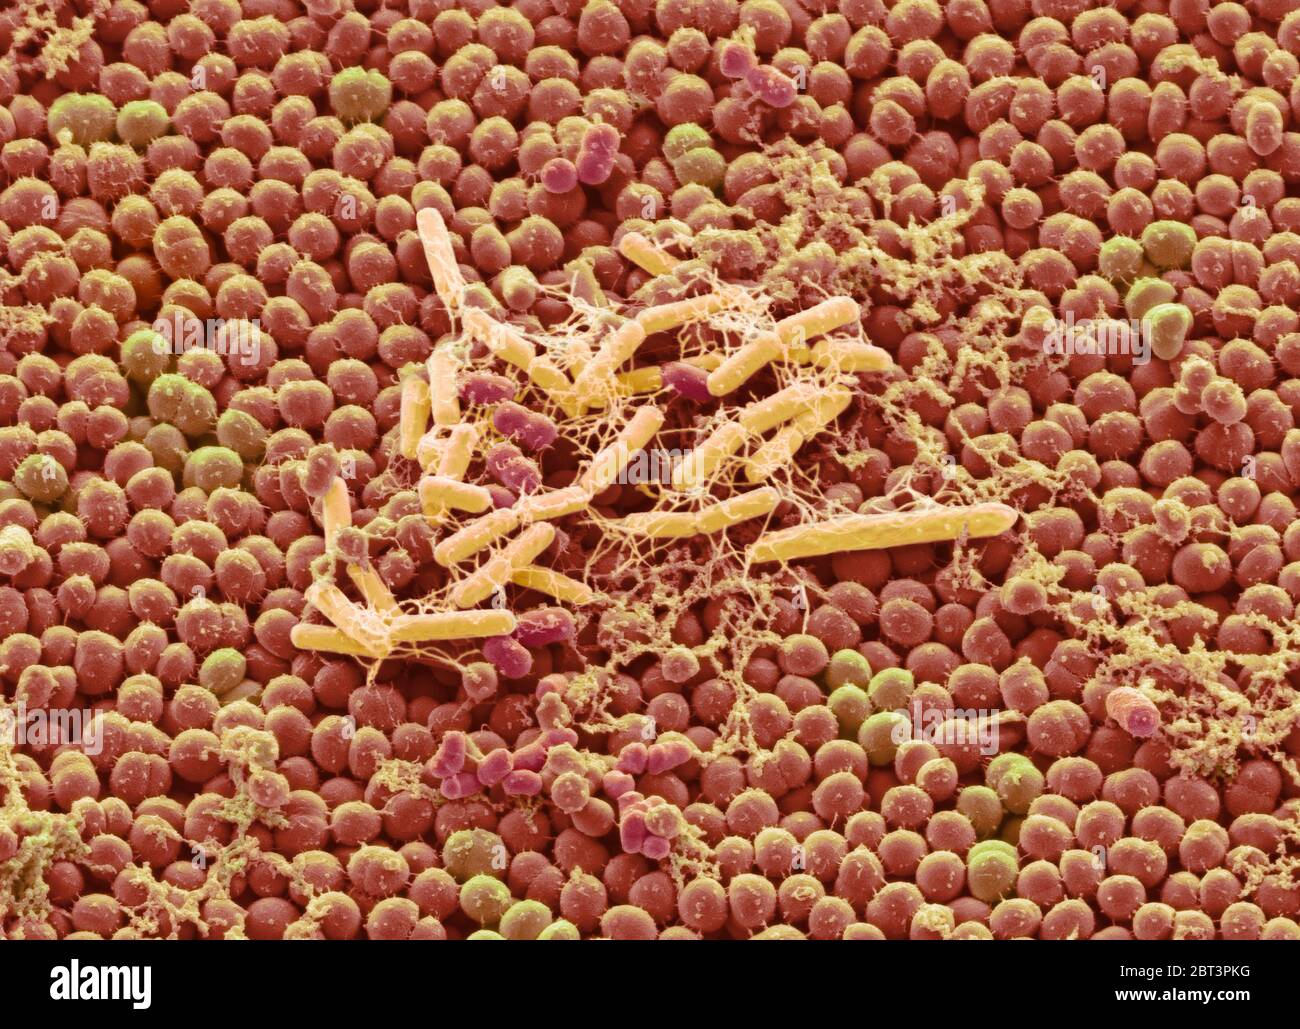 Bacteria from a human beard. Coloured scanning electron micrograph (SEM) of bacteria cultured from a human beard. A European study has found that the average man's beard is more replete with human-pathogenic bacteria than the dirtiest part of a dog's fur. There are around 1000 species of bacteria from 19 phyla found on human skin. Skin flora is usually non-pathogenic, and either commensal (not harmful to their host) or mutualistic (offer a benefit). Magnification: x4000 when printed at 10cm wide. Stock Photo